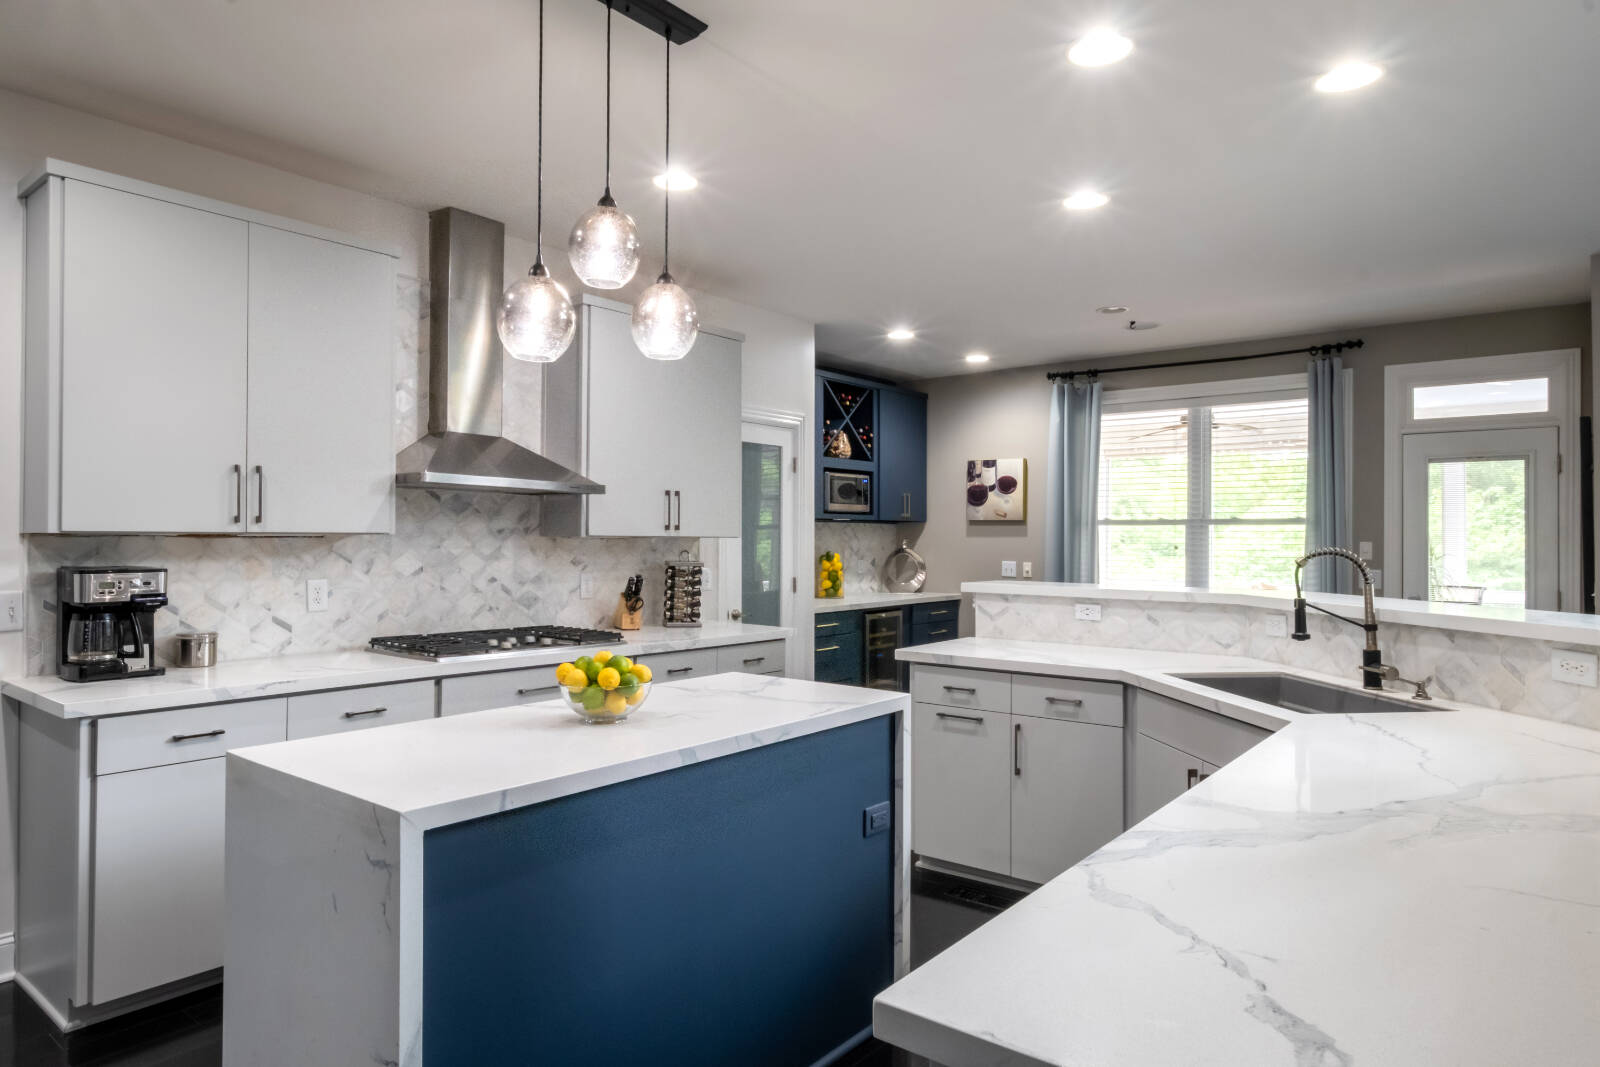 In five easy steps, the Granite Transformations team will take your kitchen from blah to beautiful!